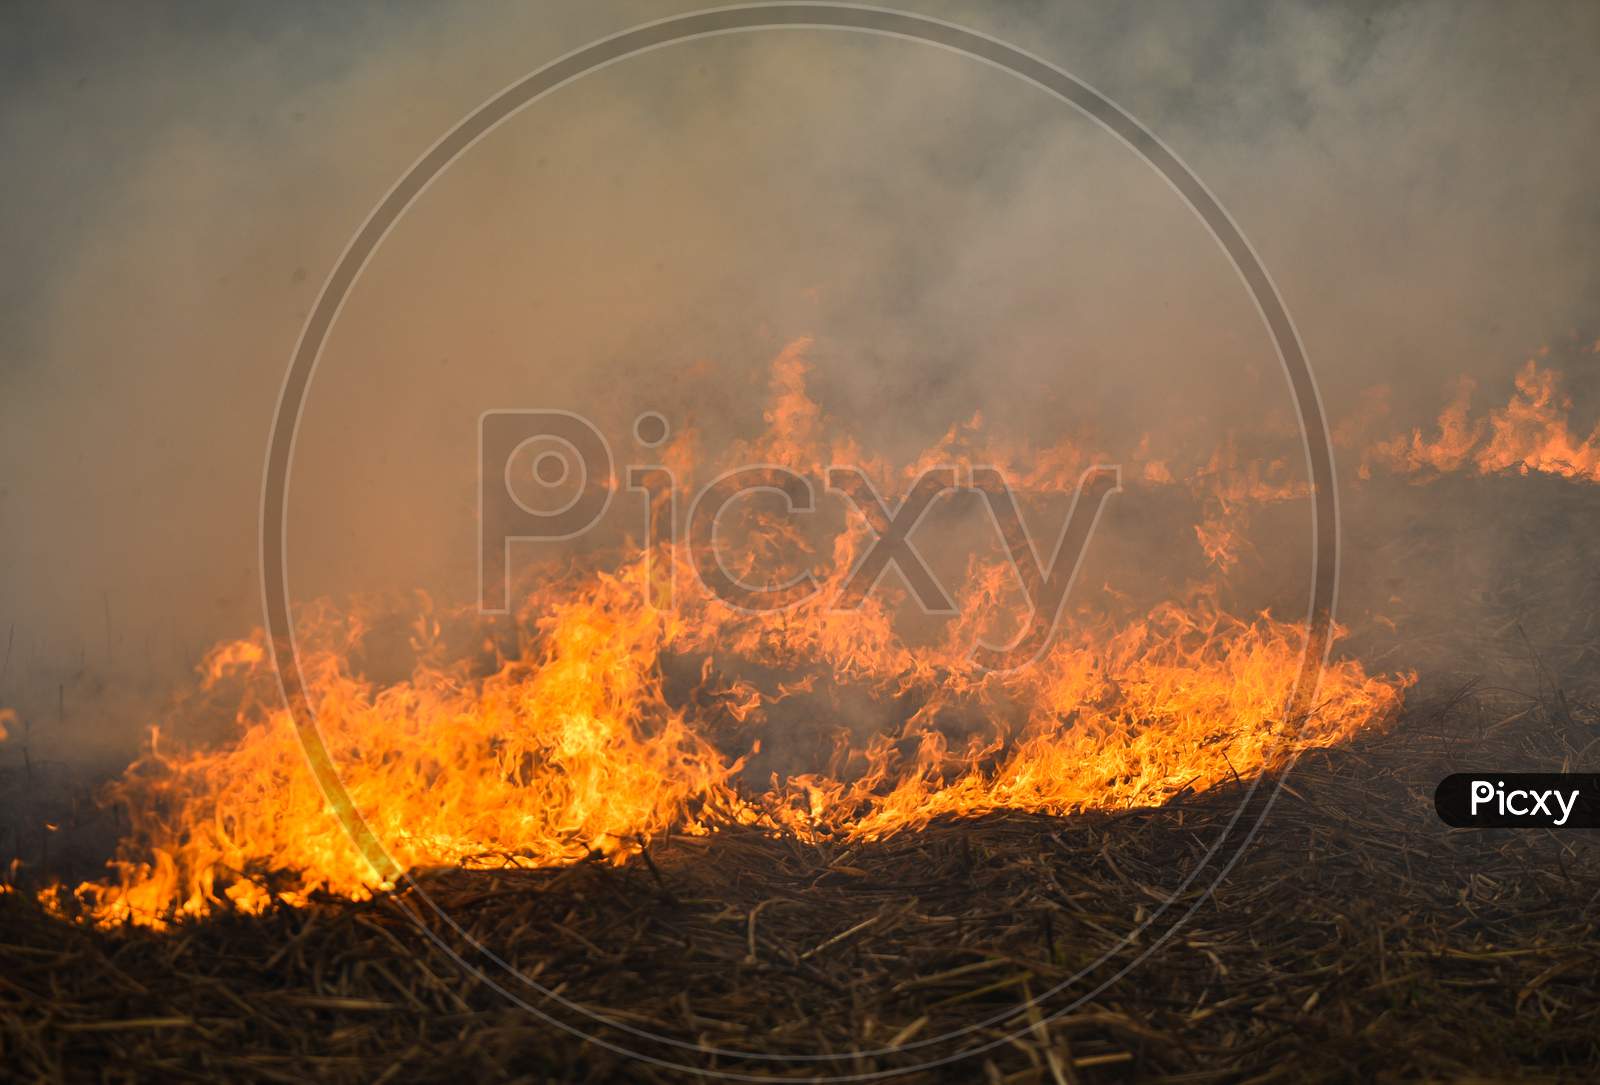 Stubble Burning of a Sugar Cane crop causing Smoke and Air Pollution